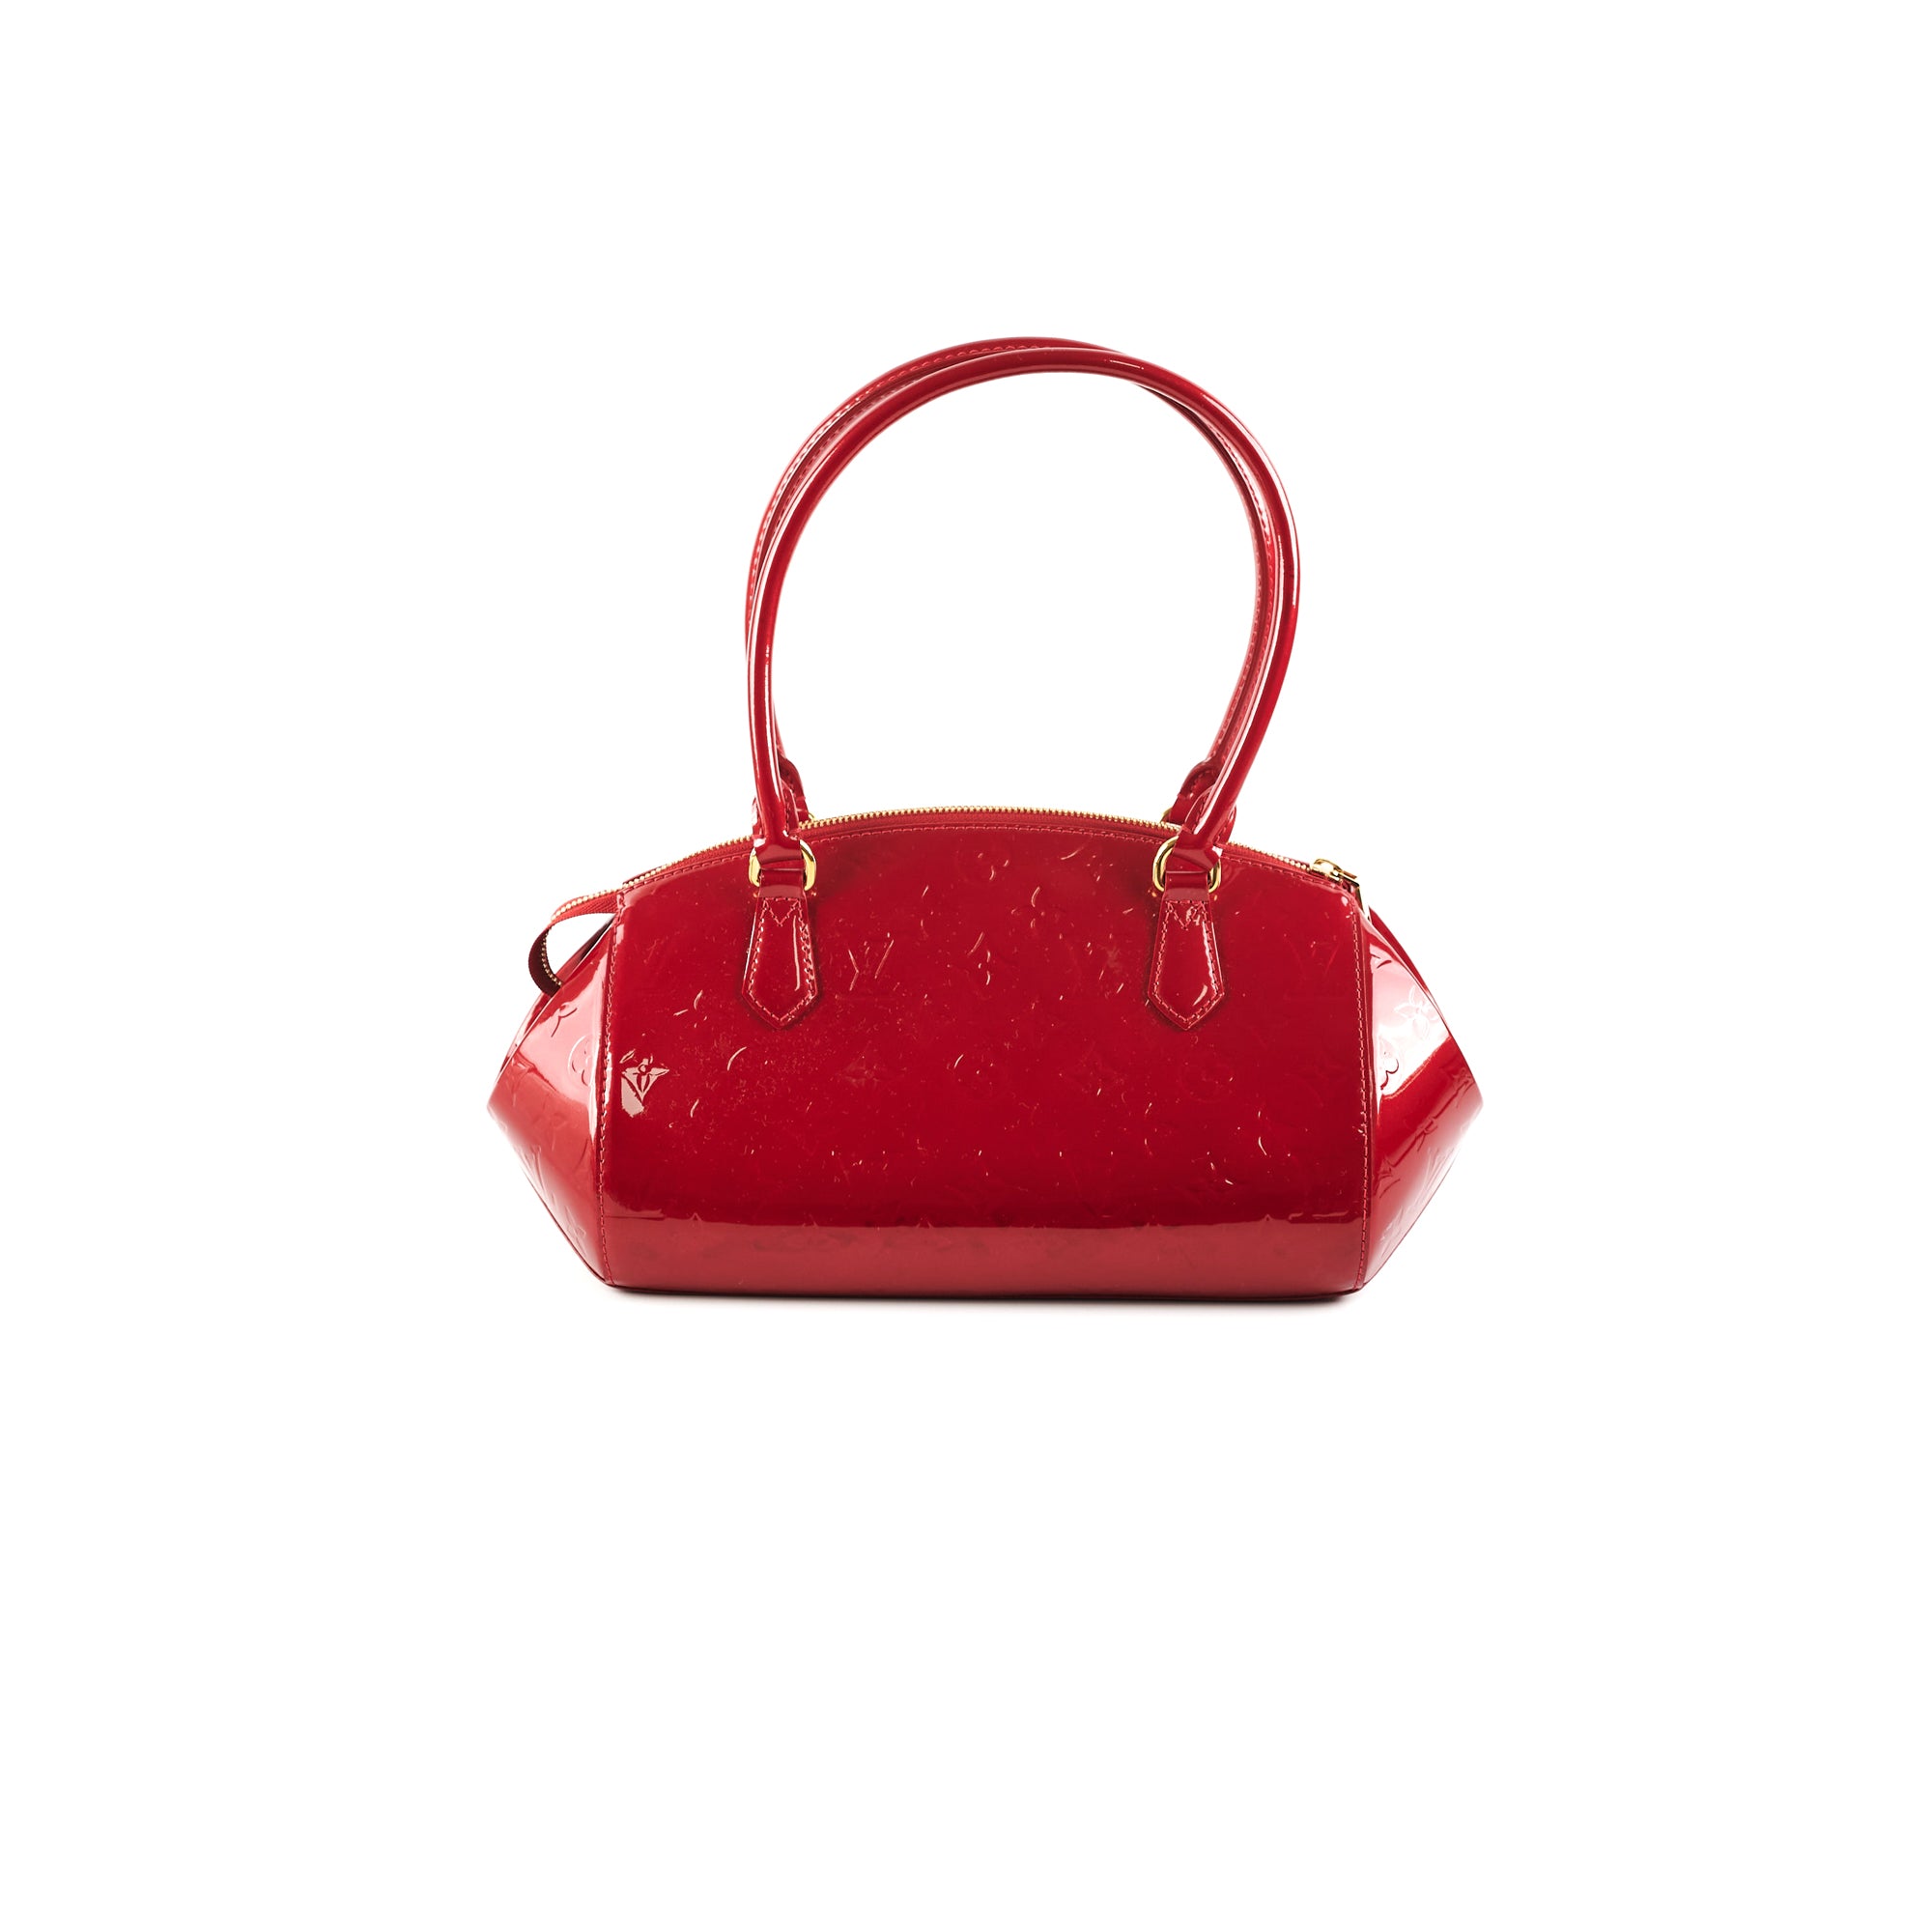 Sold at Auction: LOUIS VUITTON 2011 Sac SHERWOOD PM Cuir vernis